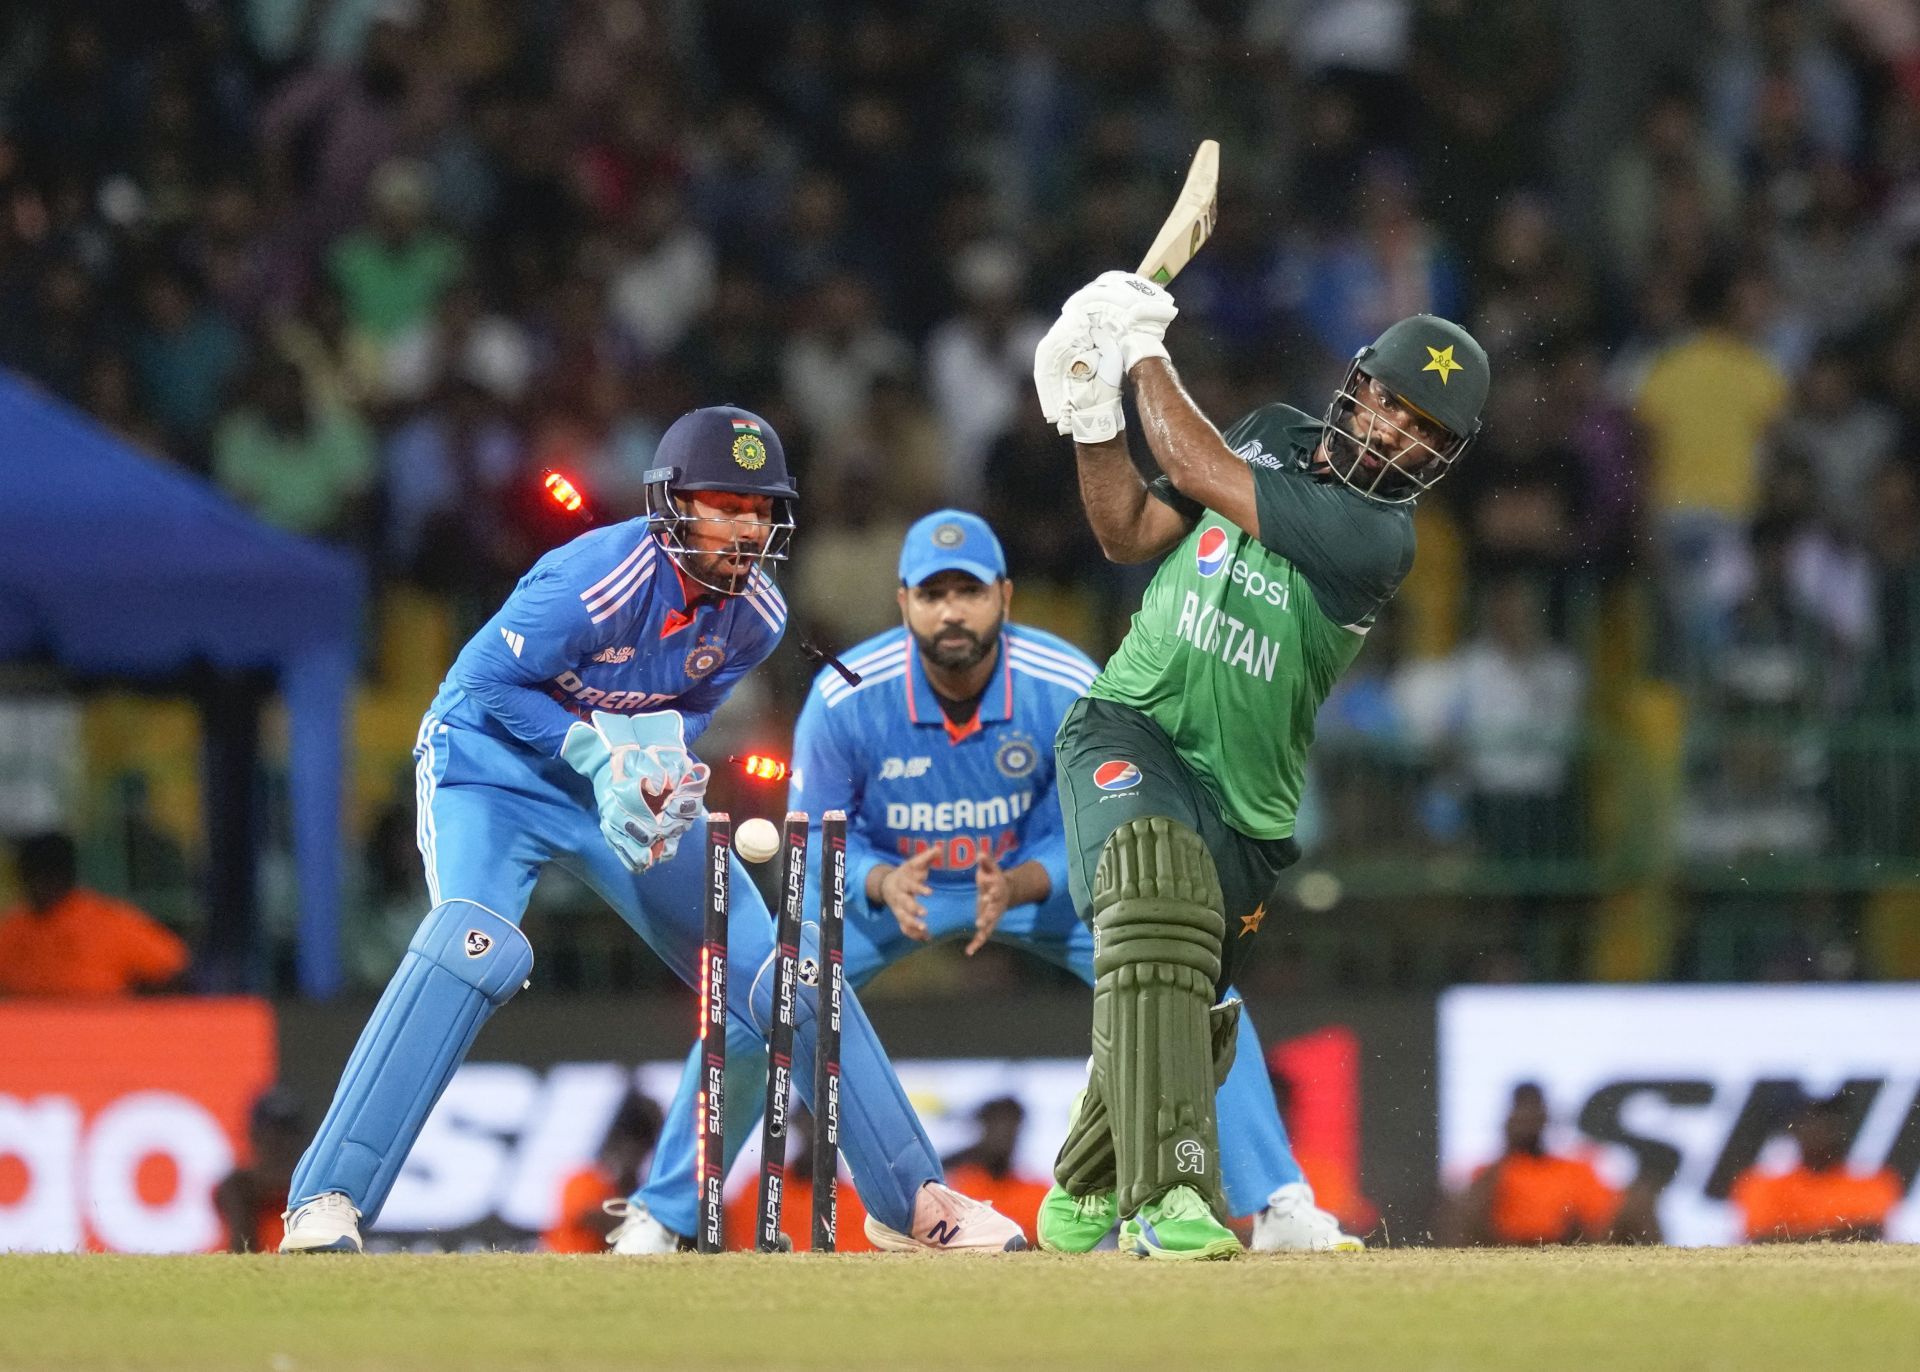 Fakhar struggled to find momentum before he was castled